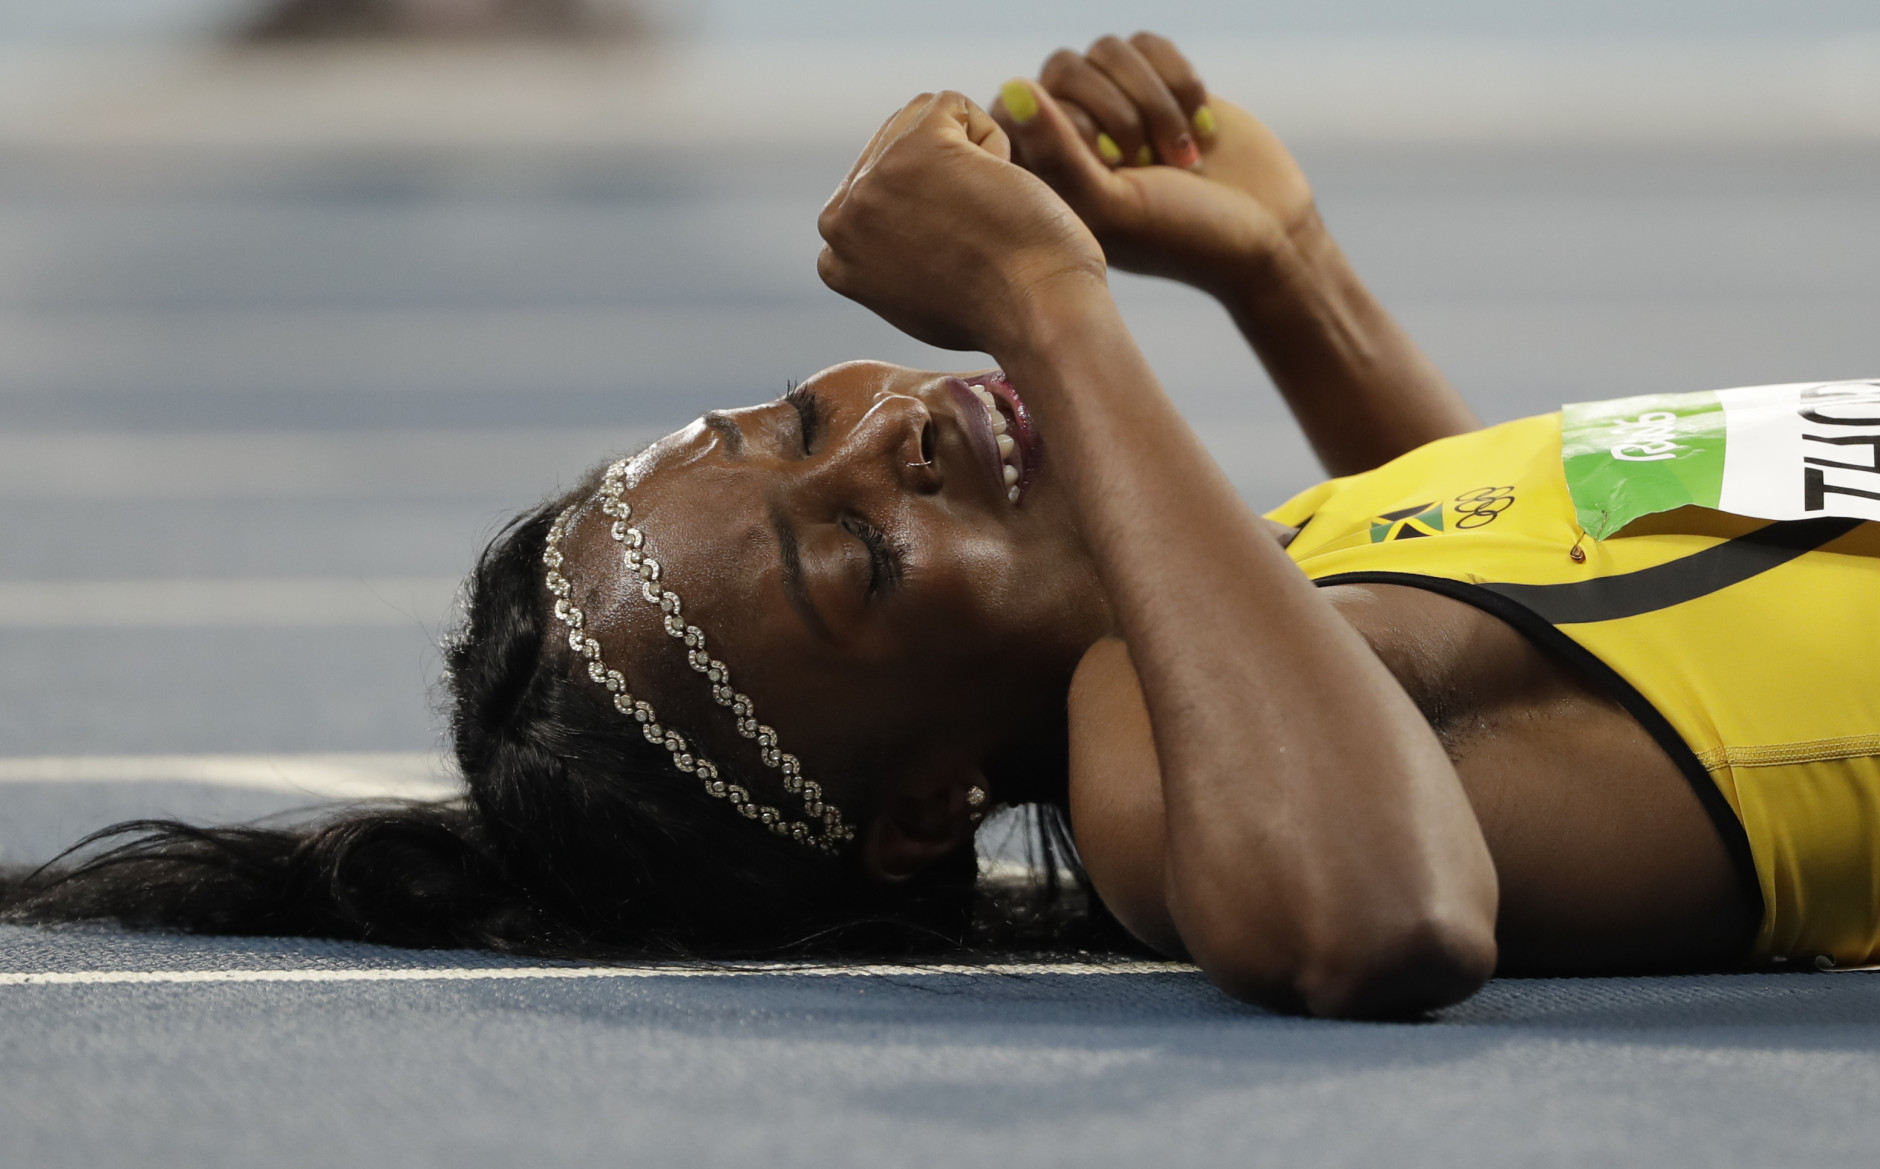 Elaine Thompson from Jamaica celebrates winning the gold medal in the women's 200-meter final during the athletics competitions of the 2016 Summer Olympics at the Olympic stadium in Rio de Janeiro, Brazil, Wednesday, Aug. 17, 2016. (AP Photo/David J. Phillip)